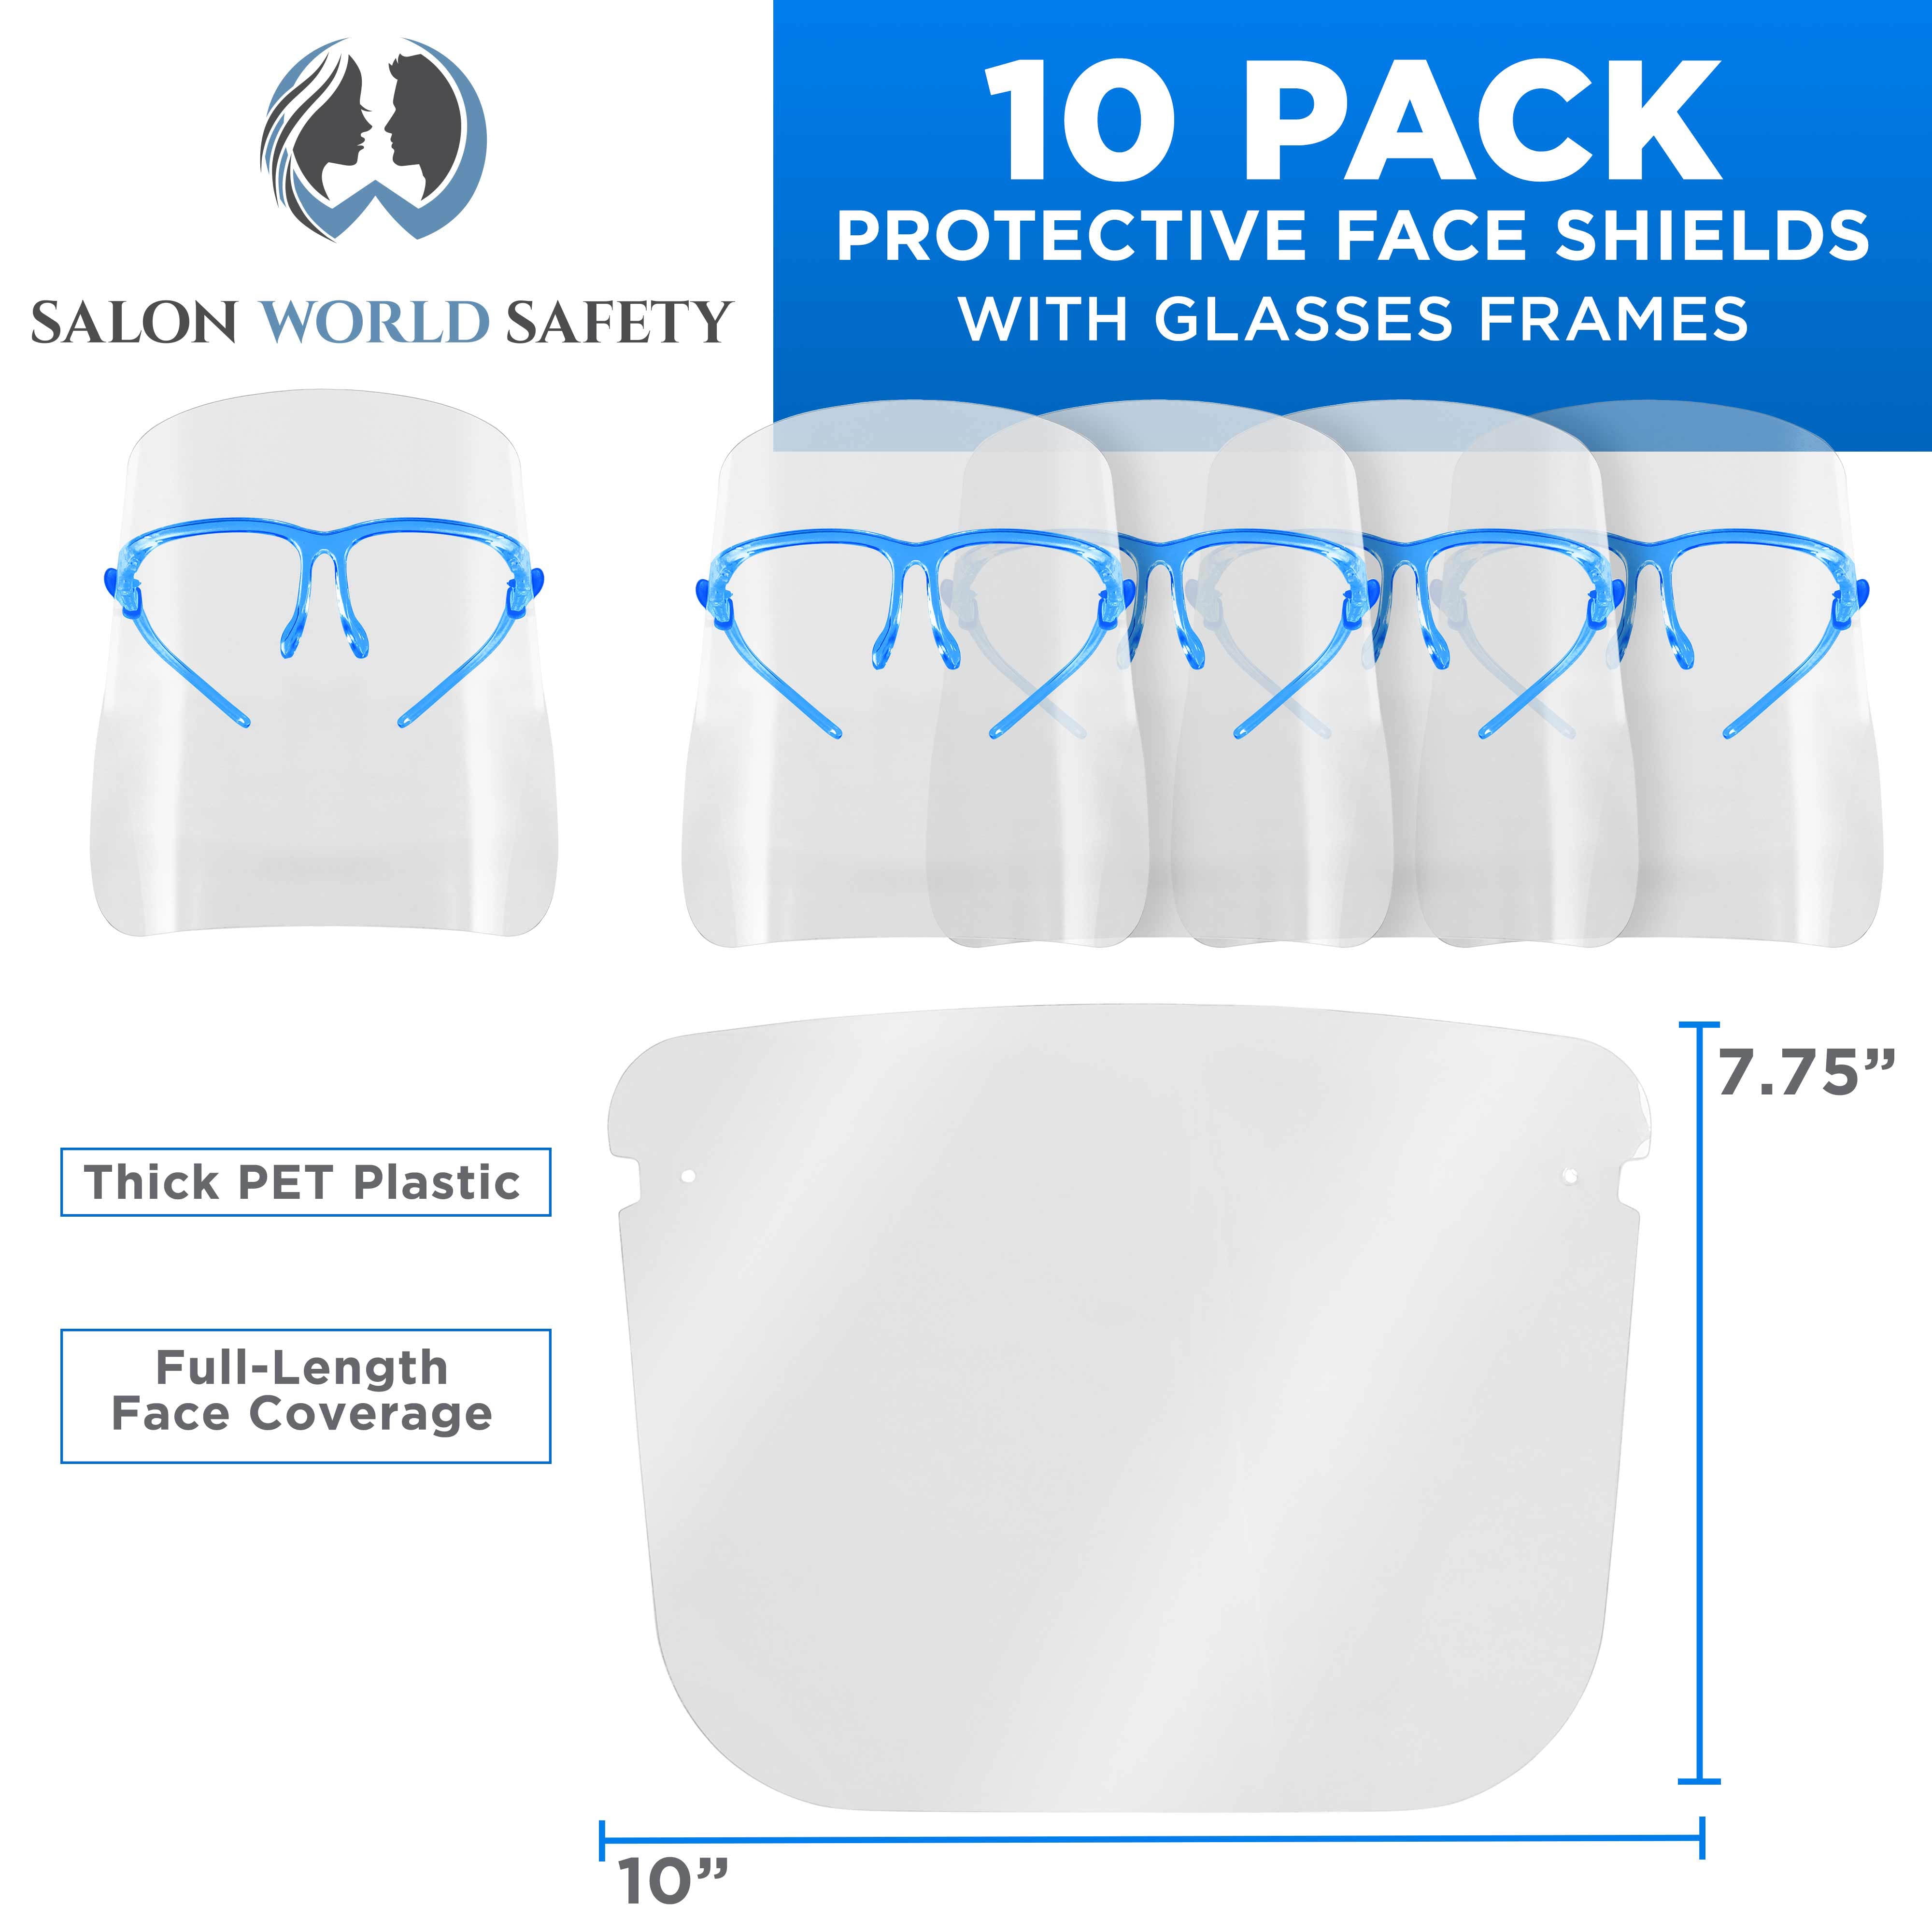 Details about   TCP Global Salon World Safety Face Shields with Black Glasses Frames Pack of 4 